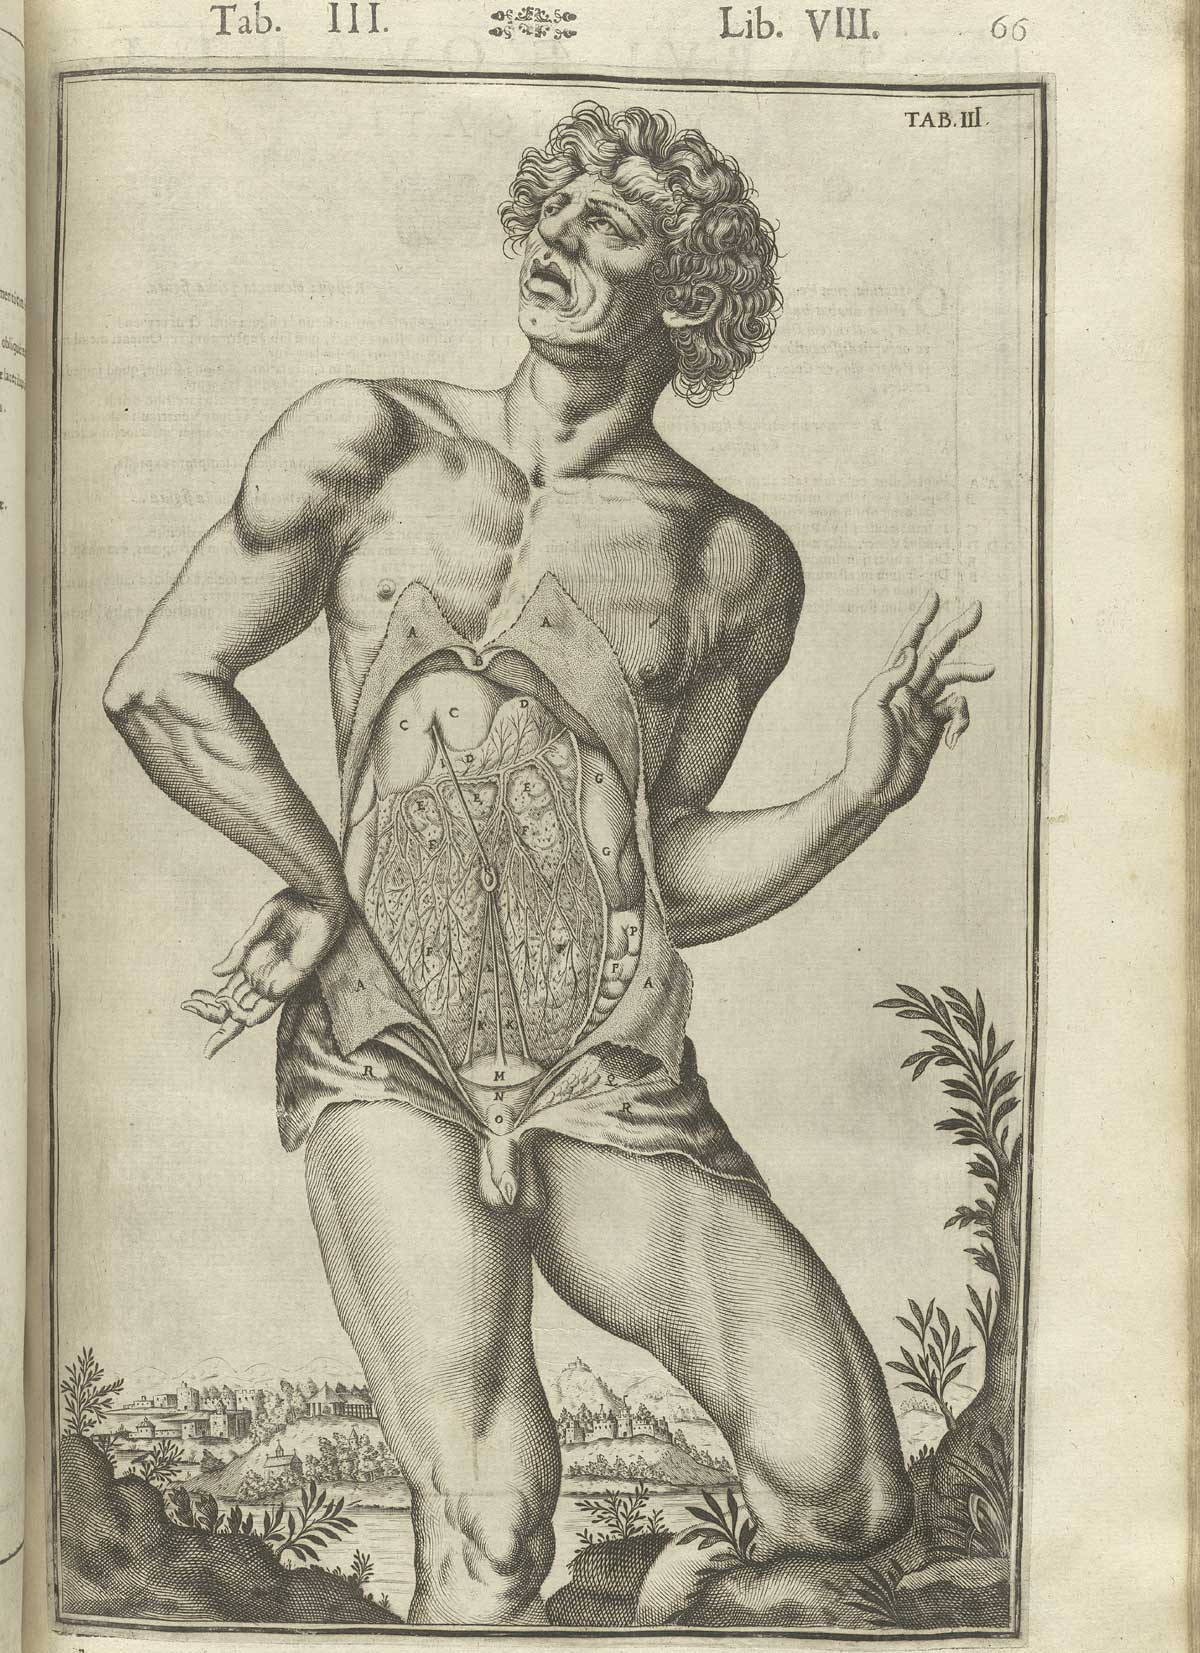 Engraving showing a facing view of a standing nude male anatomical figure with face turned to the left in a pastoral setting, with his abdomen cut open showing the peritoneum, navel, intestines, and bladder exposed in detail; from Adriaan van de Spiegel and Giulio Cassieri’s De humani corporis fabrica libri decem, Venice, 1627, NLM call no. WZ 250 S755dh 1627.